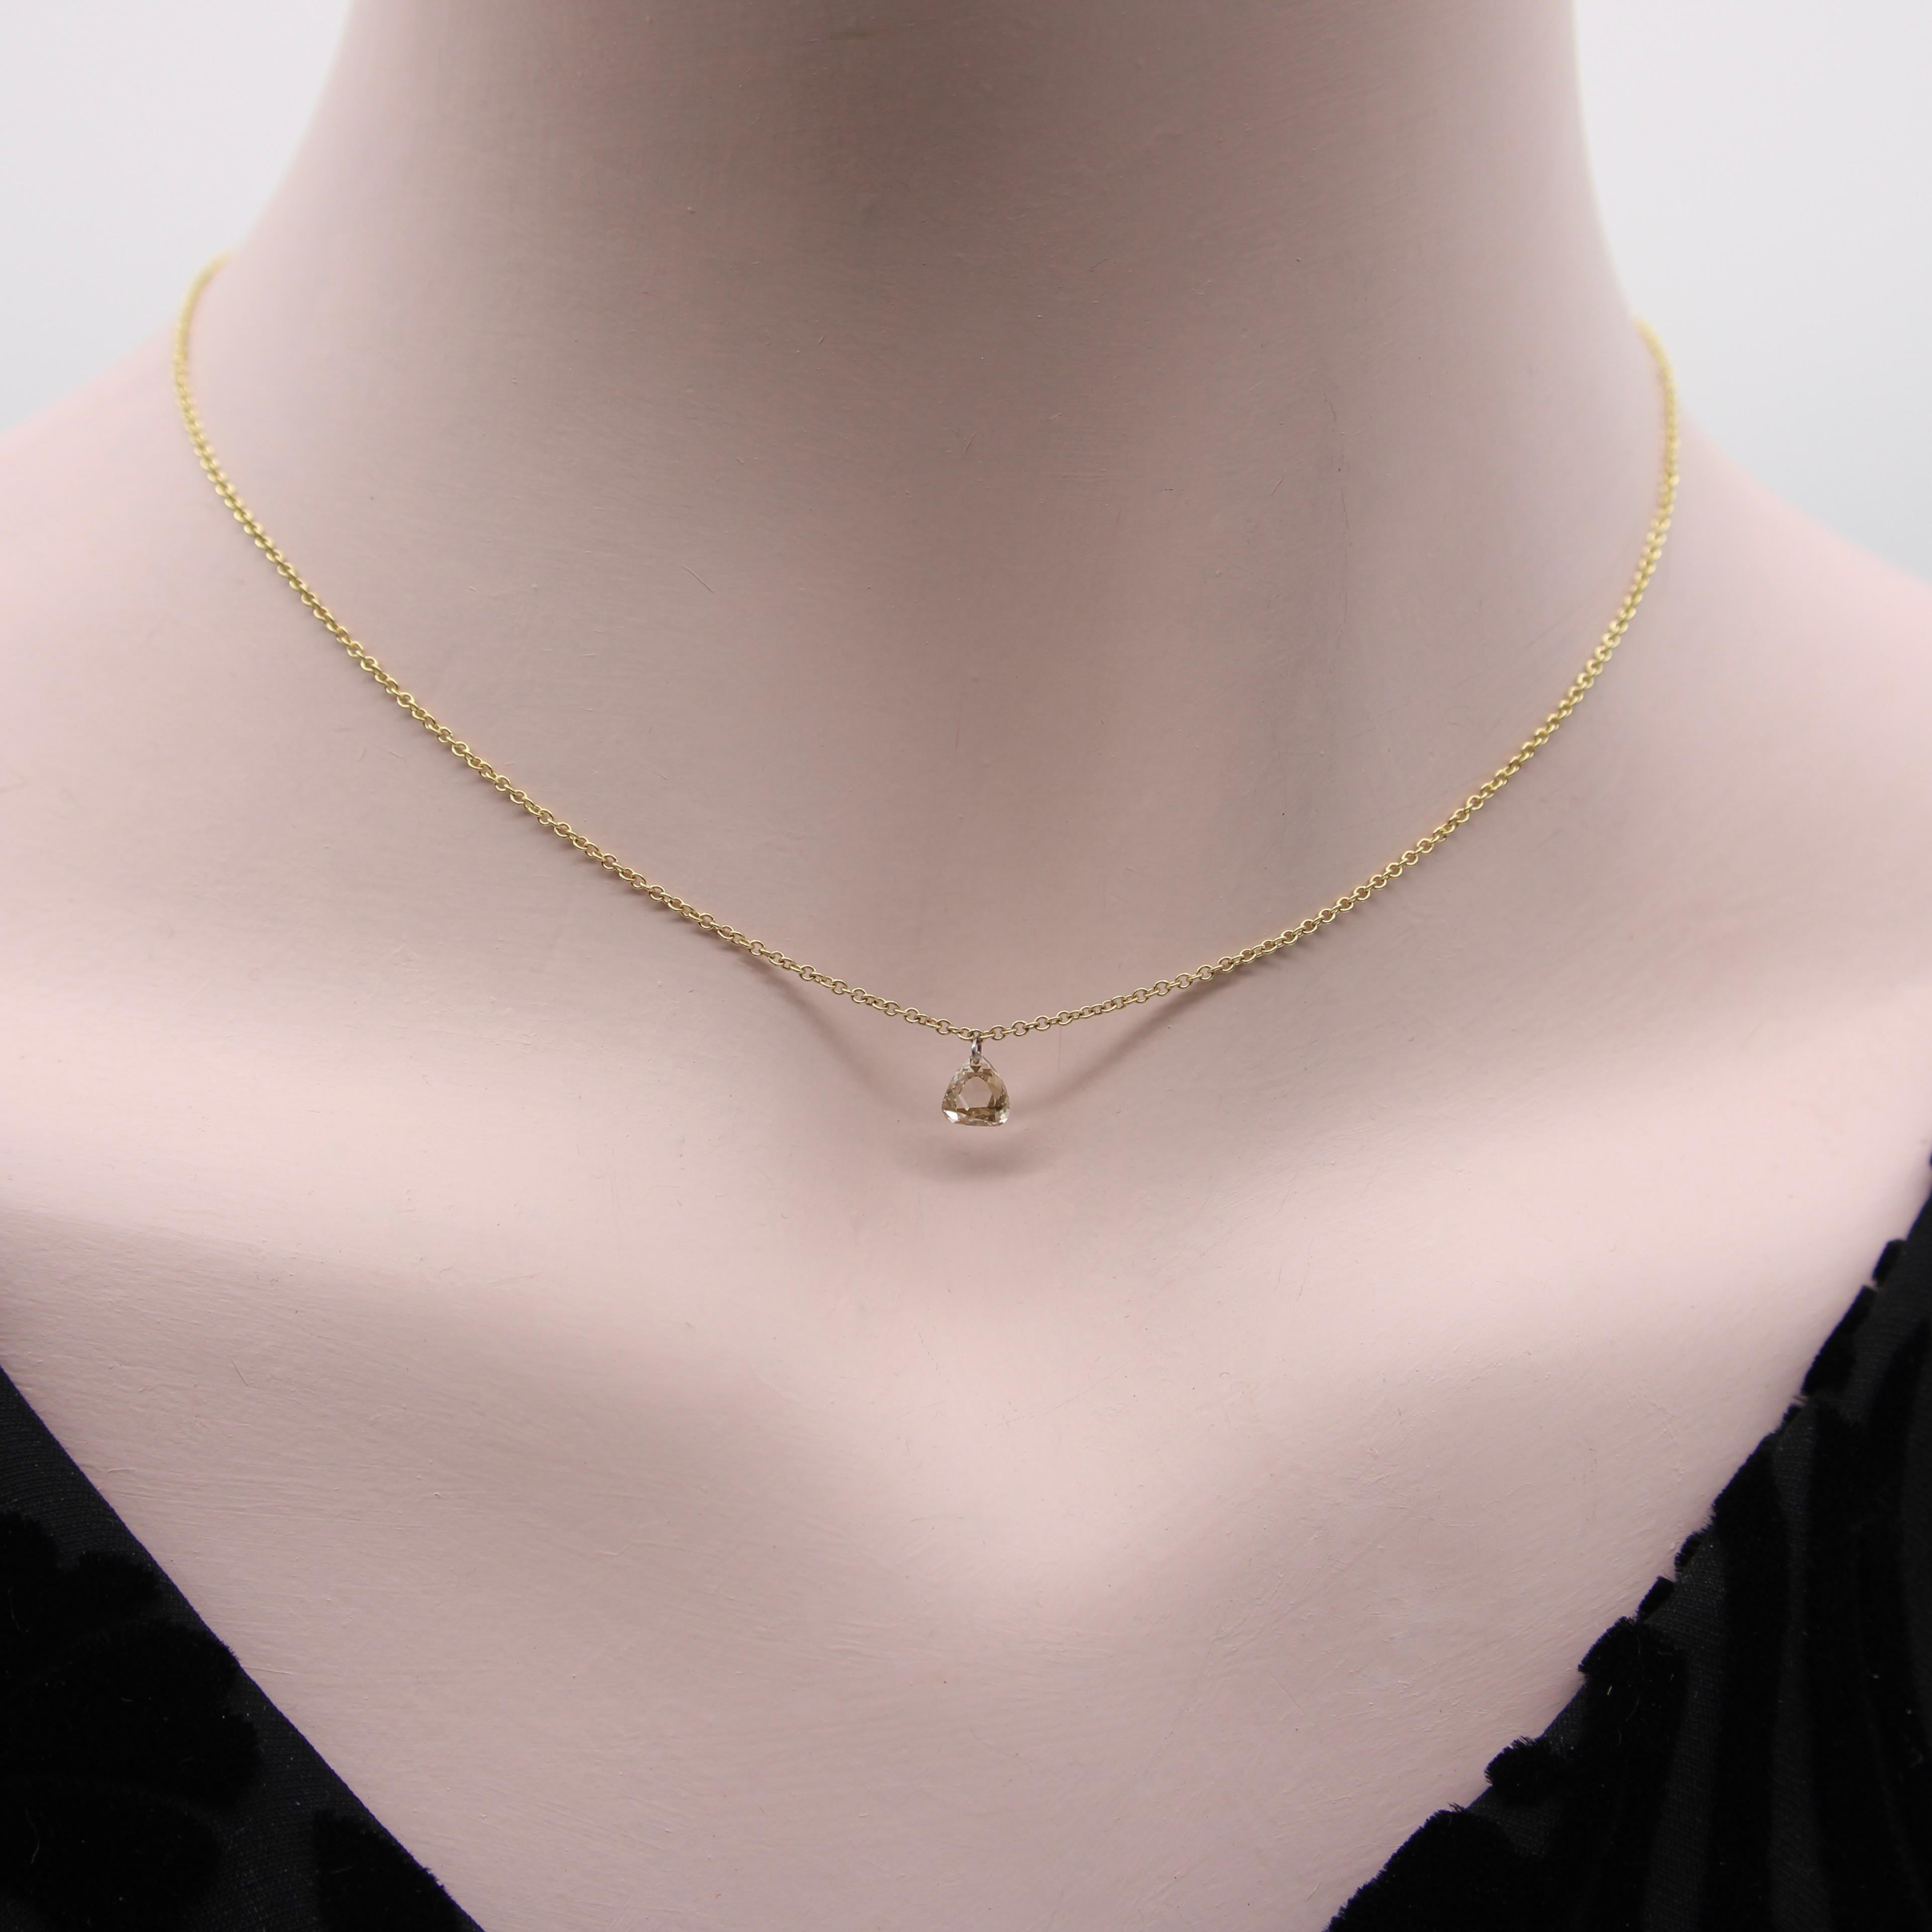 Dangling Pear Shape Champagne Rose Cut Diamond on 14K Gold Chain  For Sale 1